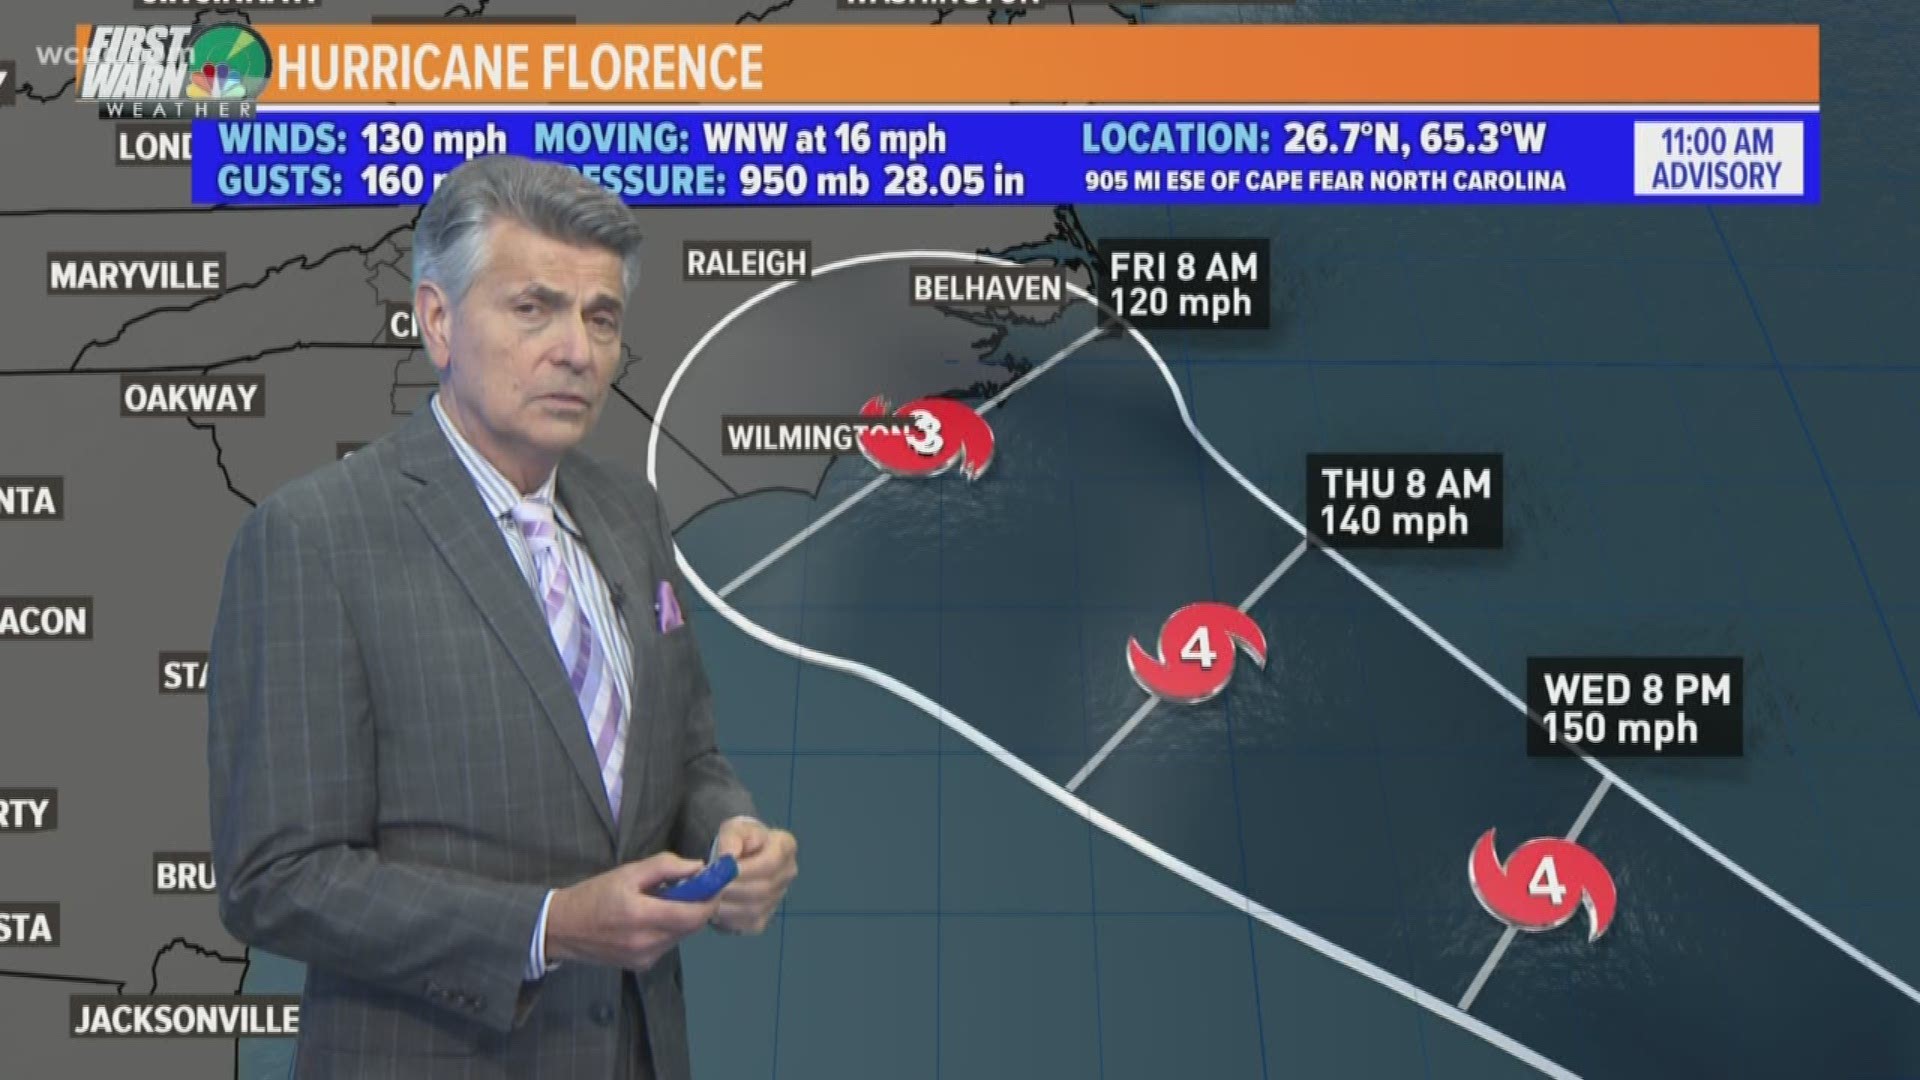 HURRICANE FLORENCE: Tuesday noon update